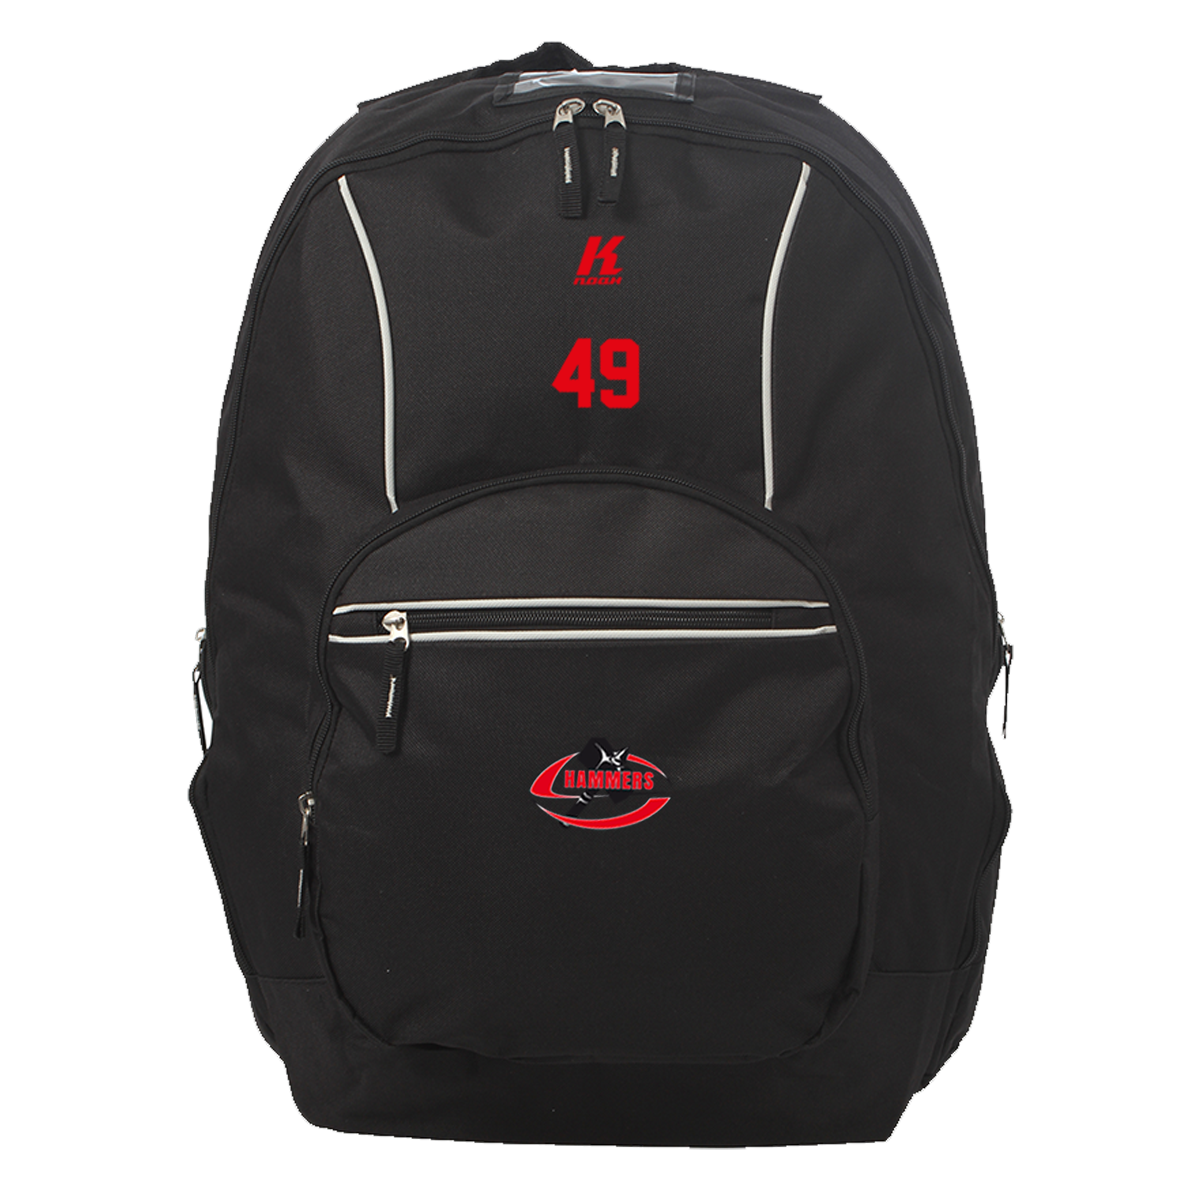 S-Hammers Heritage Backpack with Playernumber or Initials